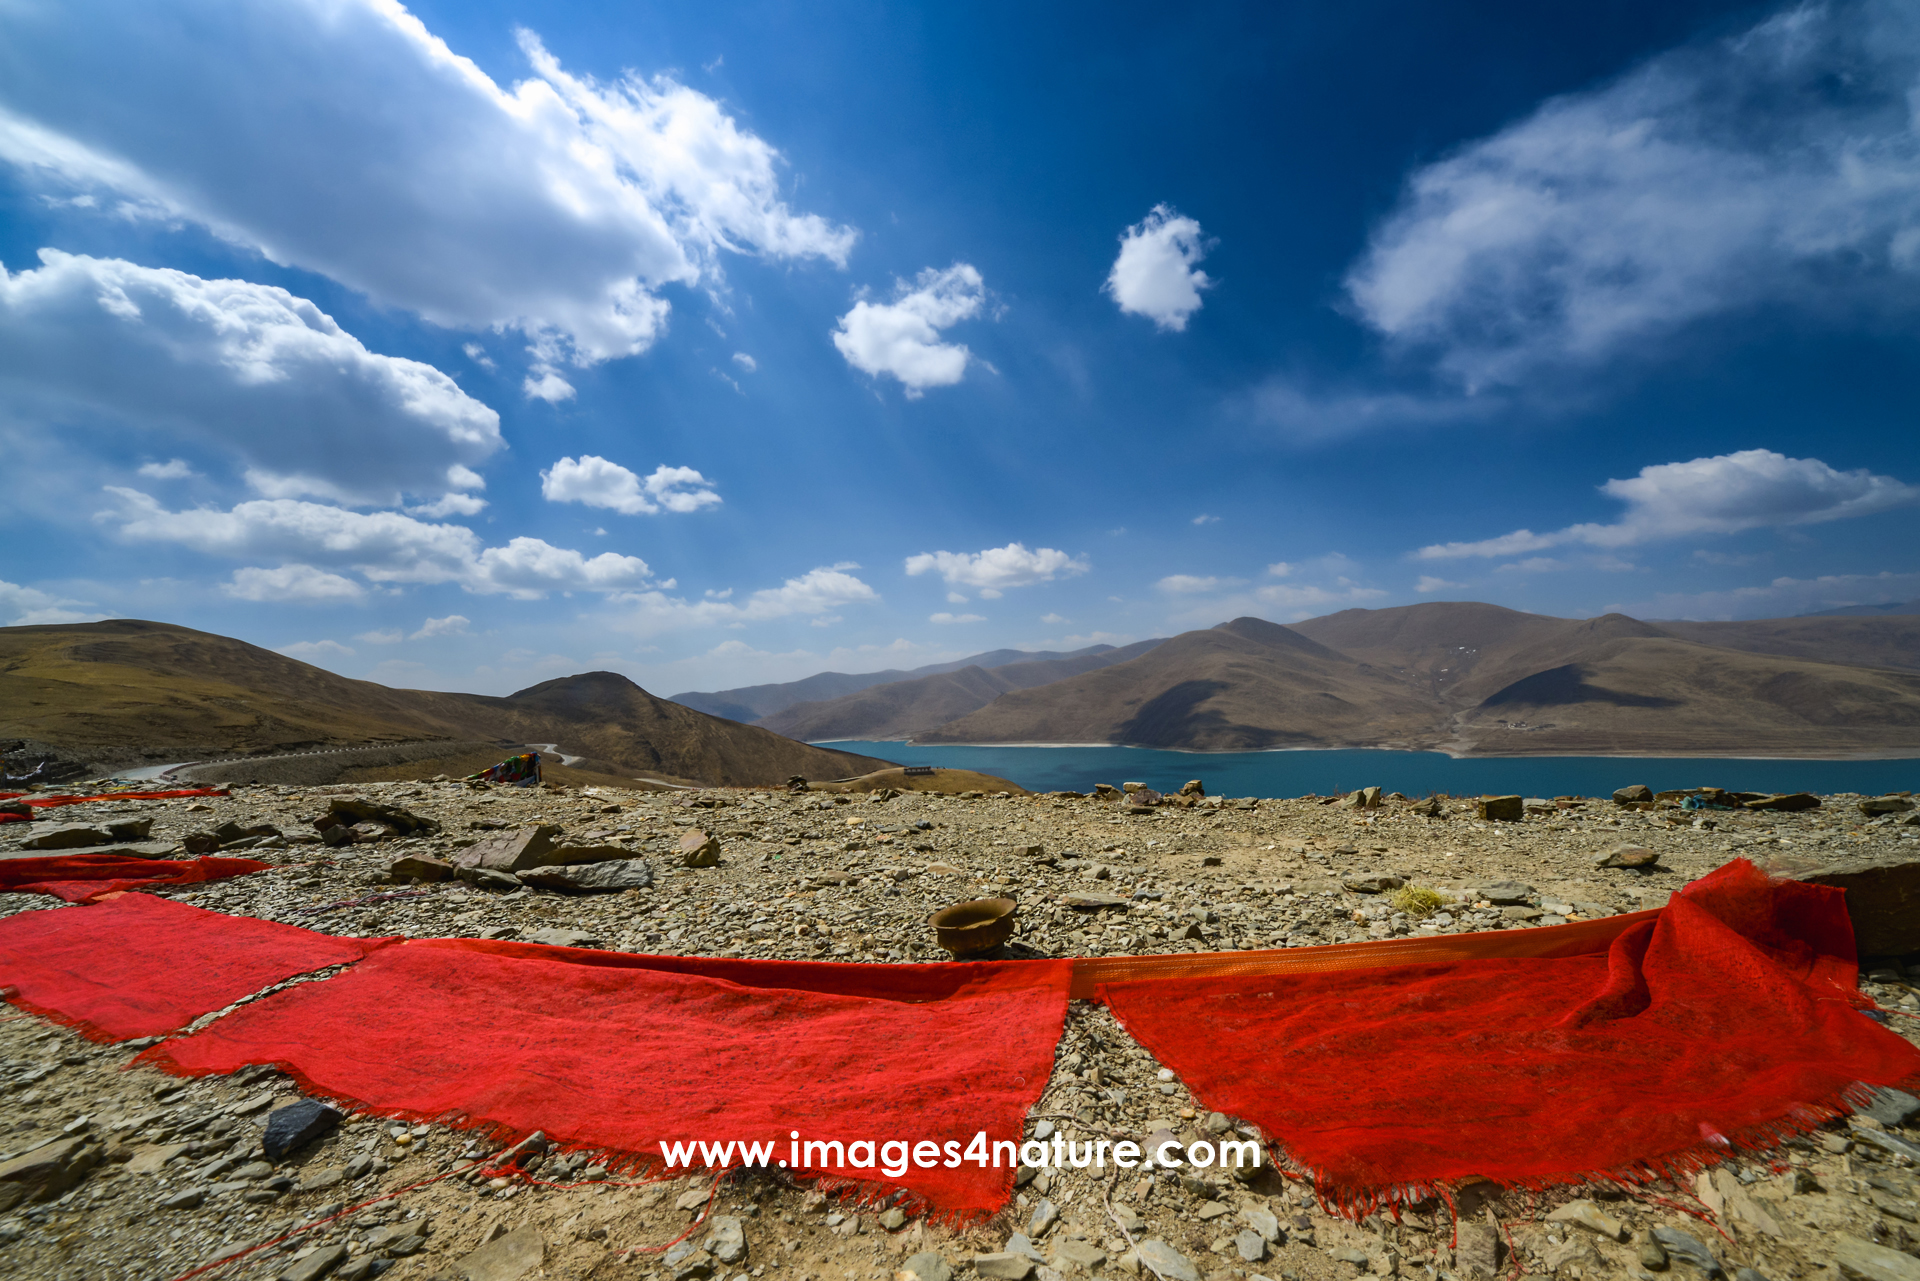 Large dark red prayer flags laid out on the arid floor with mountains and a beautiful lake in the background